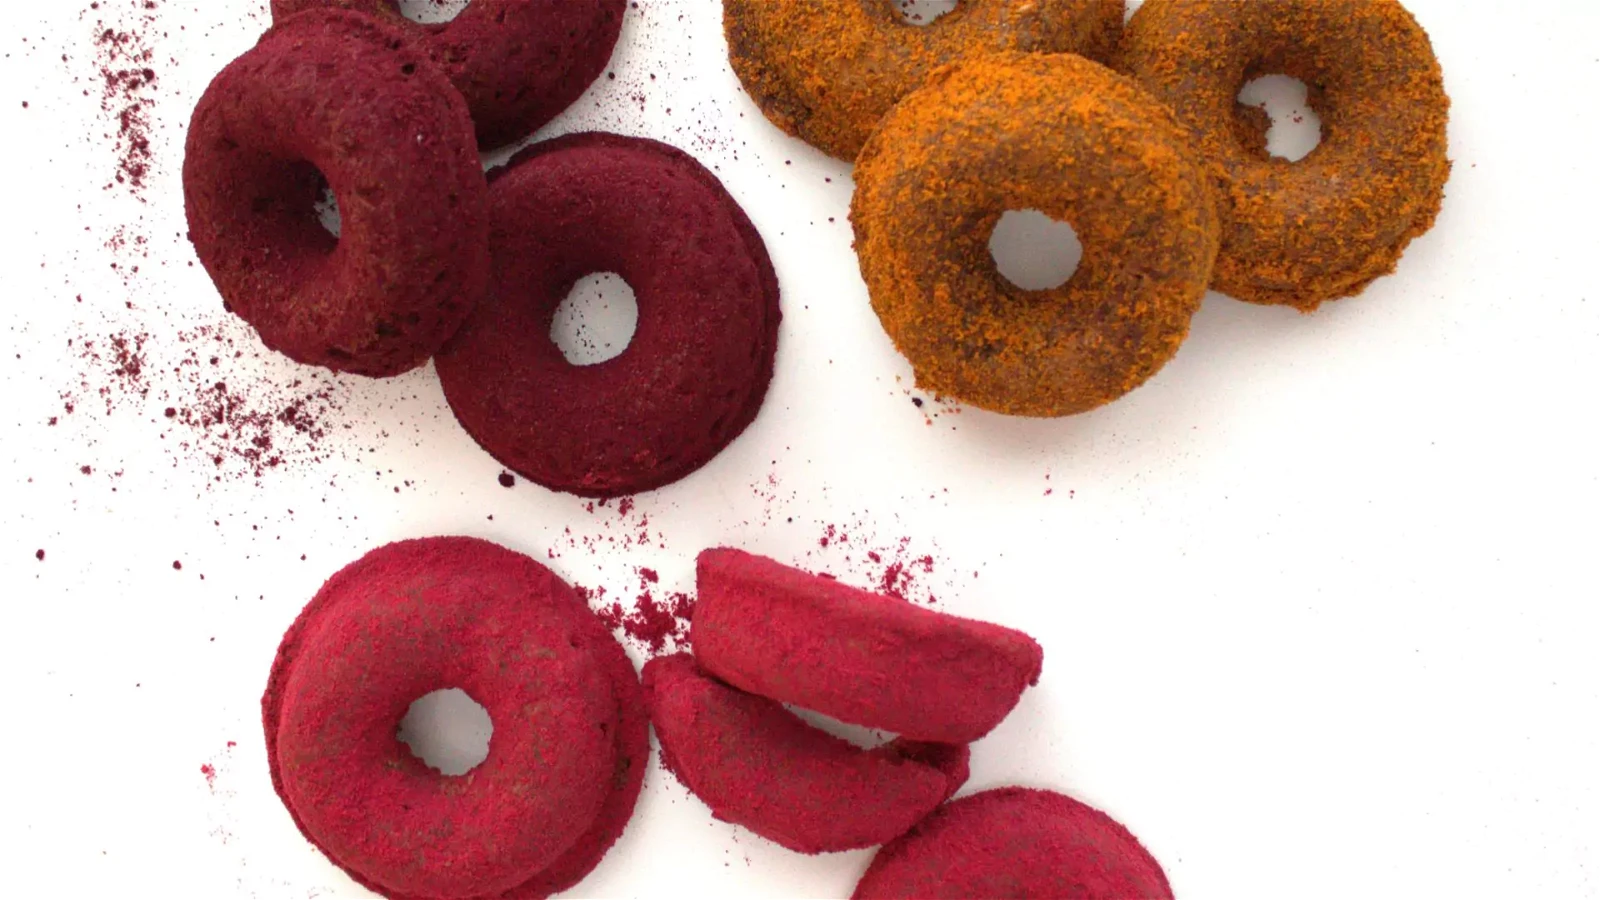 Image of Berry powder covered donuts